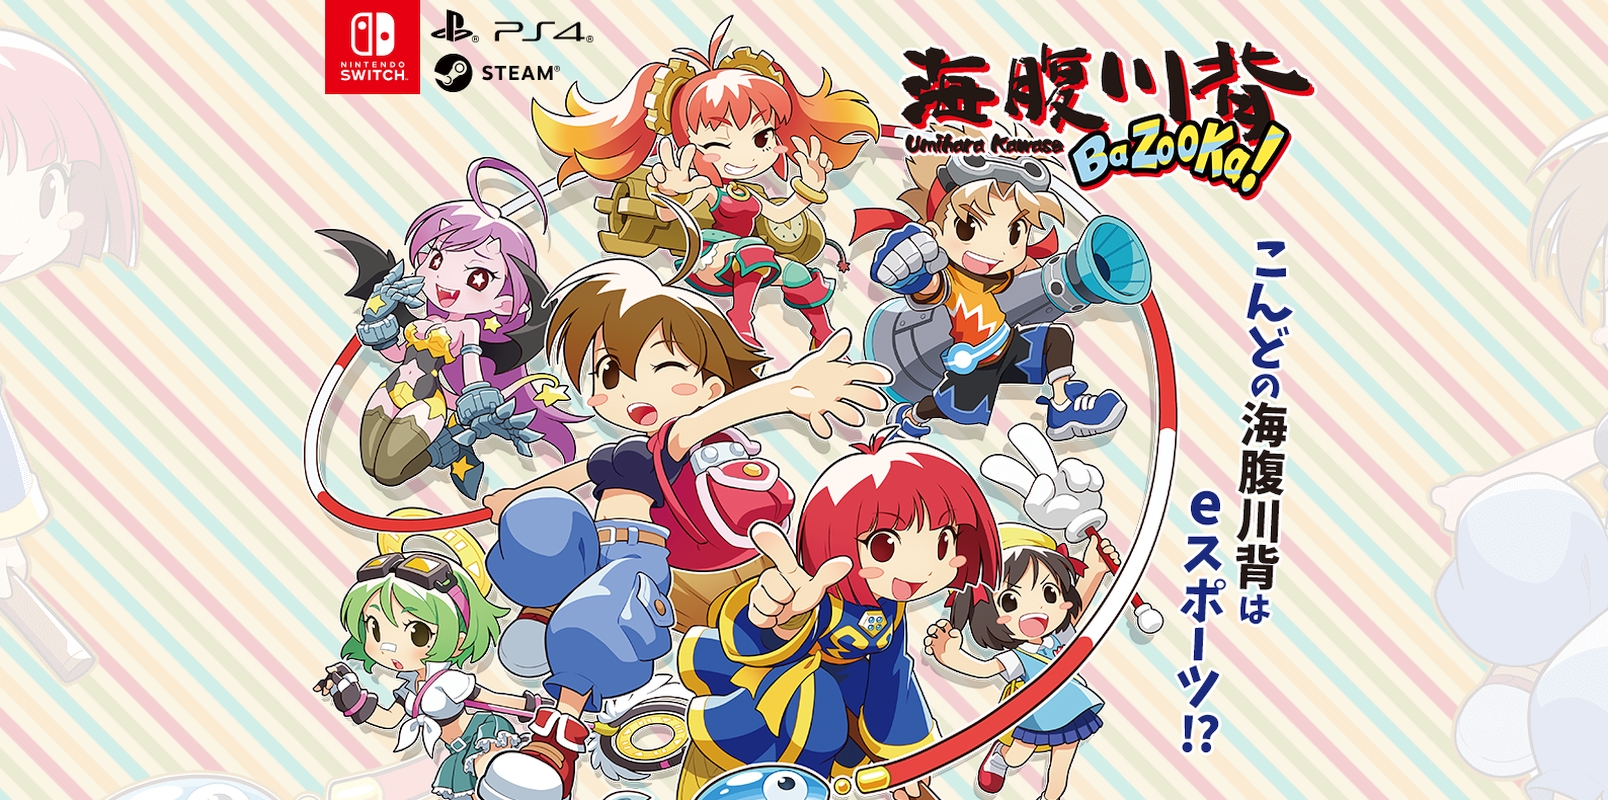 Umihara Kawase BaZooKa! Website Launched With Release Planned For Late Spring